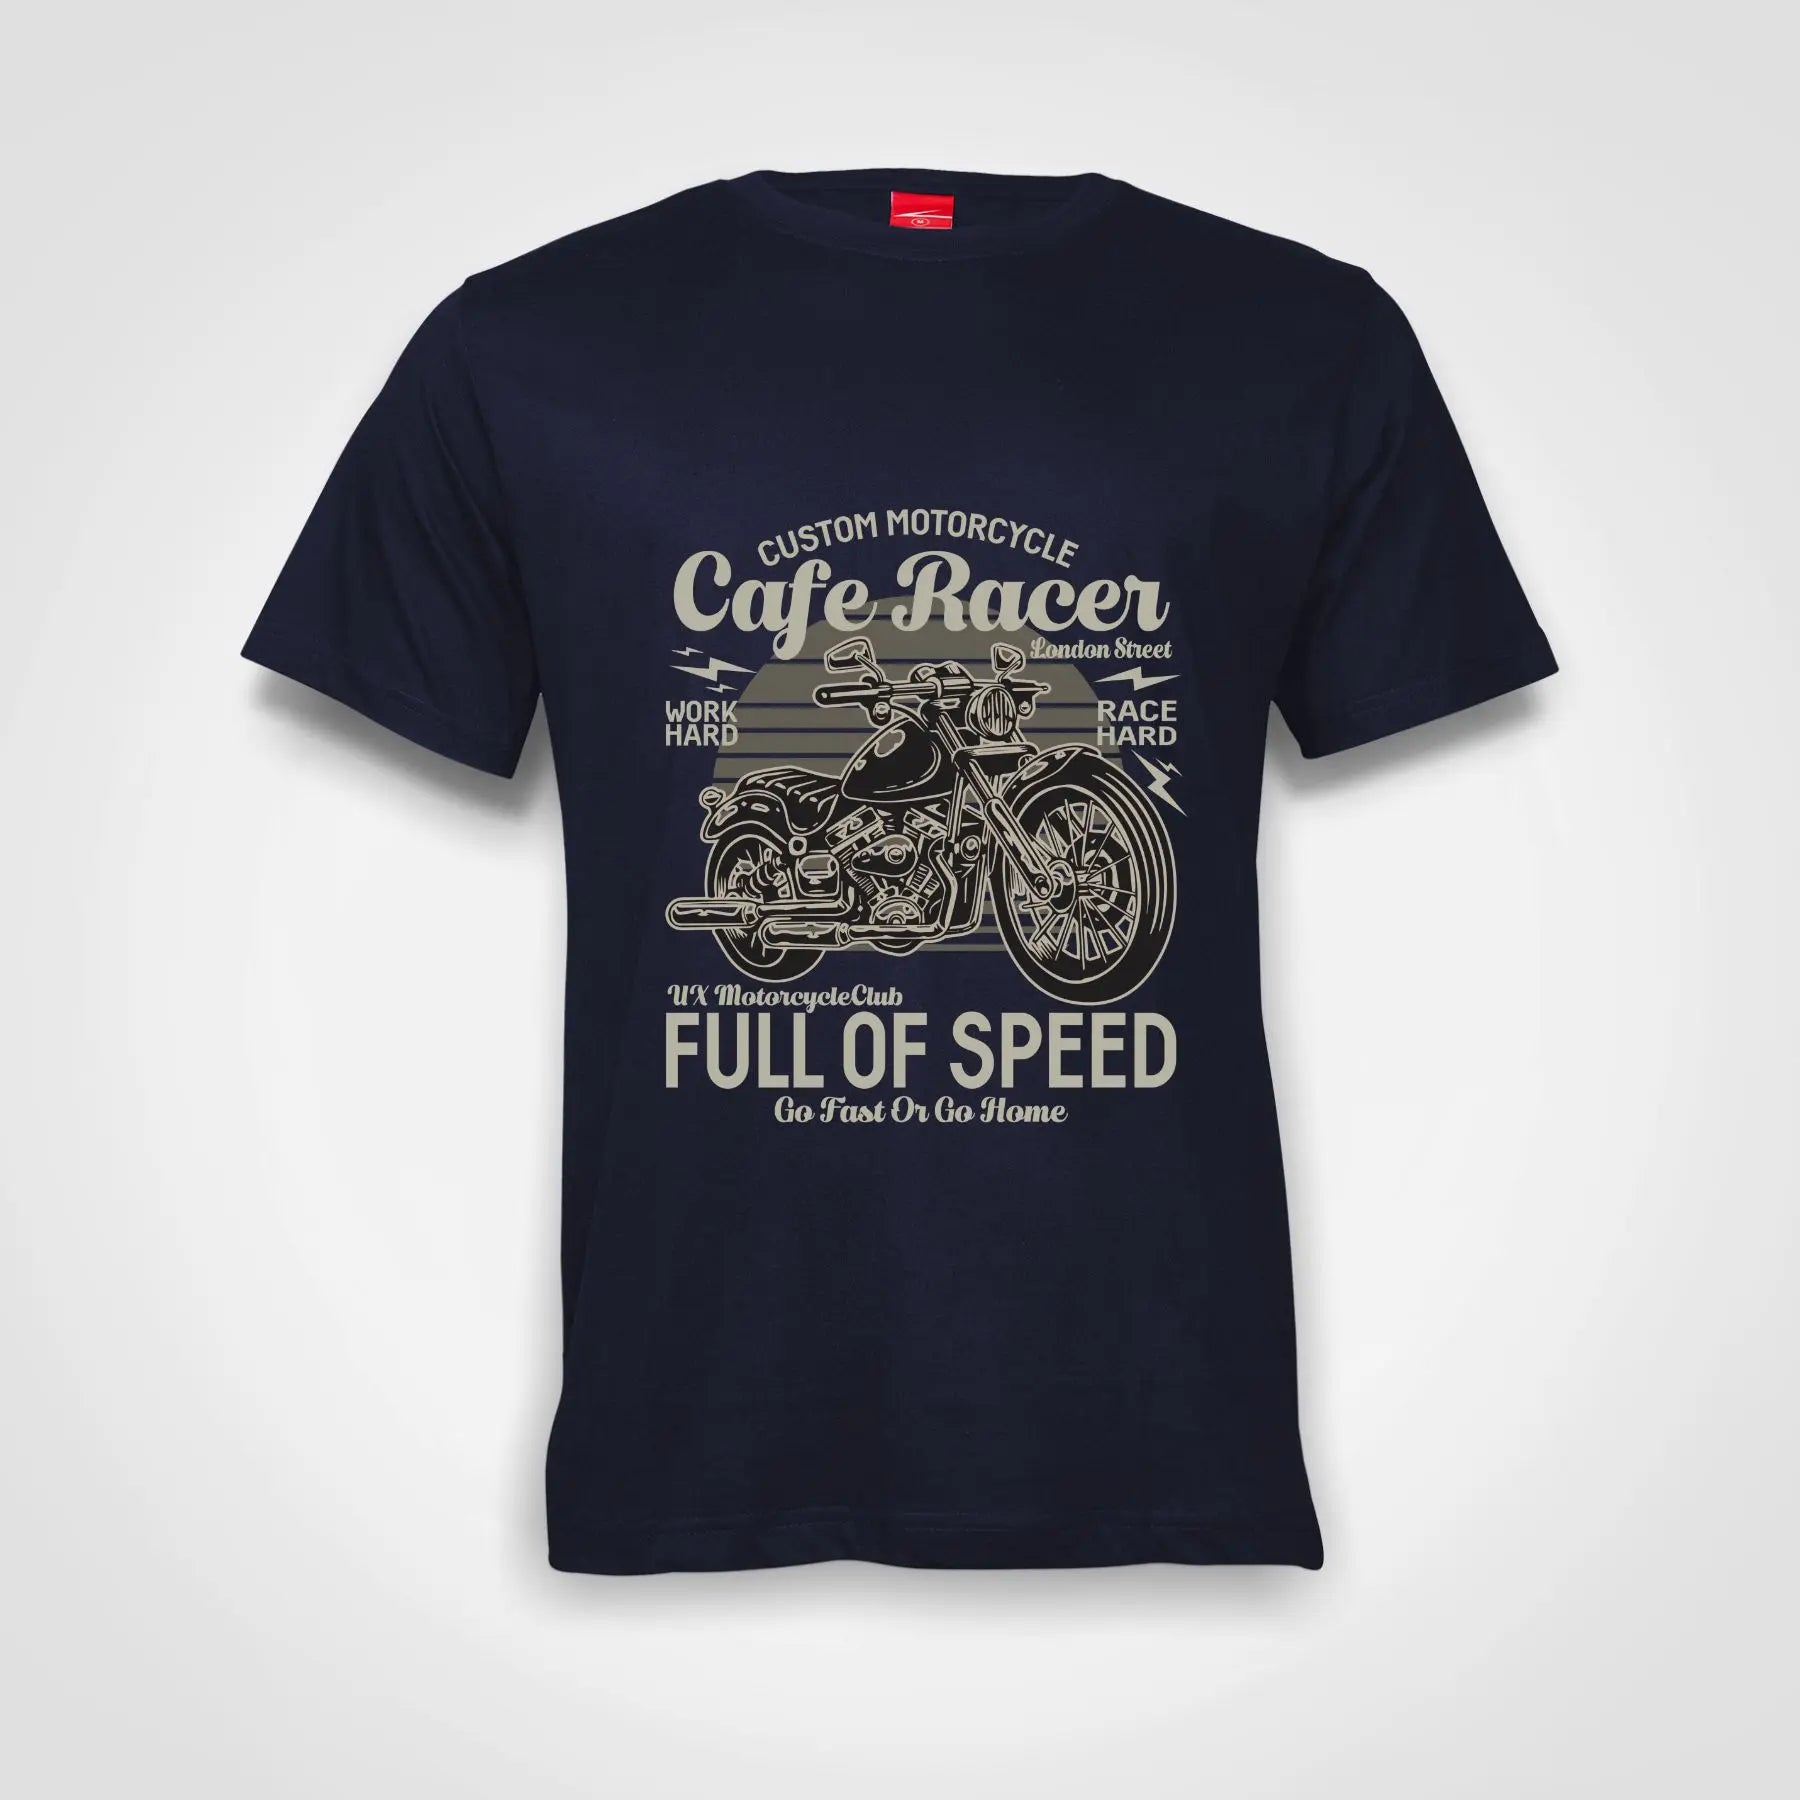 Custom Motorcycle Cafe Racer Full Of Speed Cotton T-Shirt Navy IZZIT APPAREL